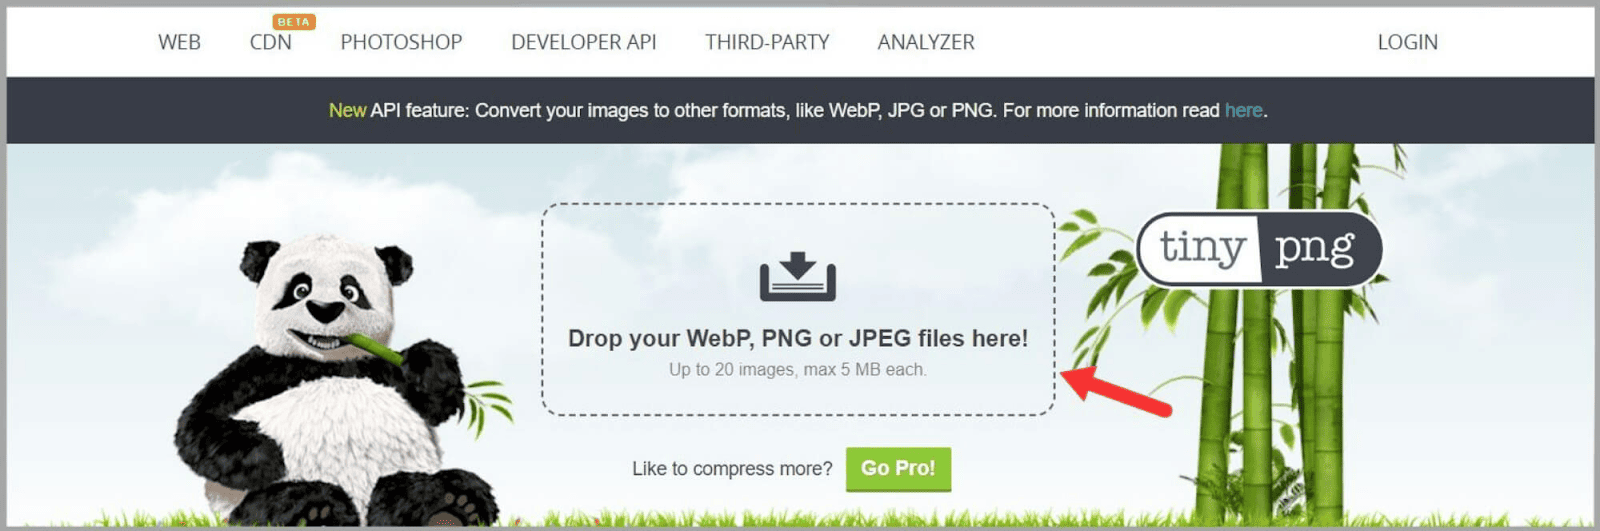 TinyPNG for image compression